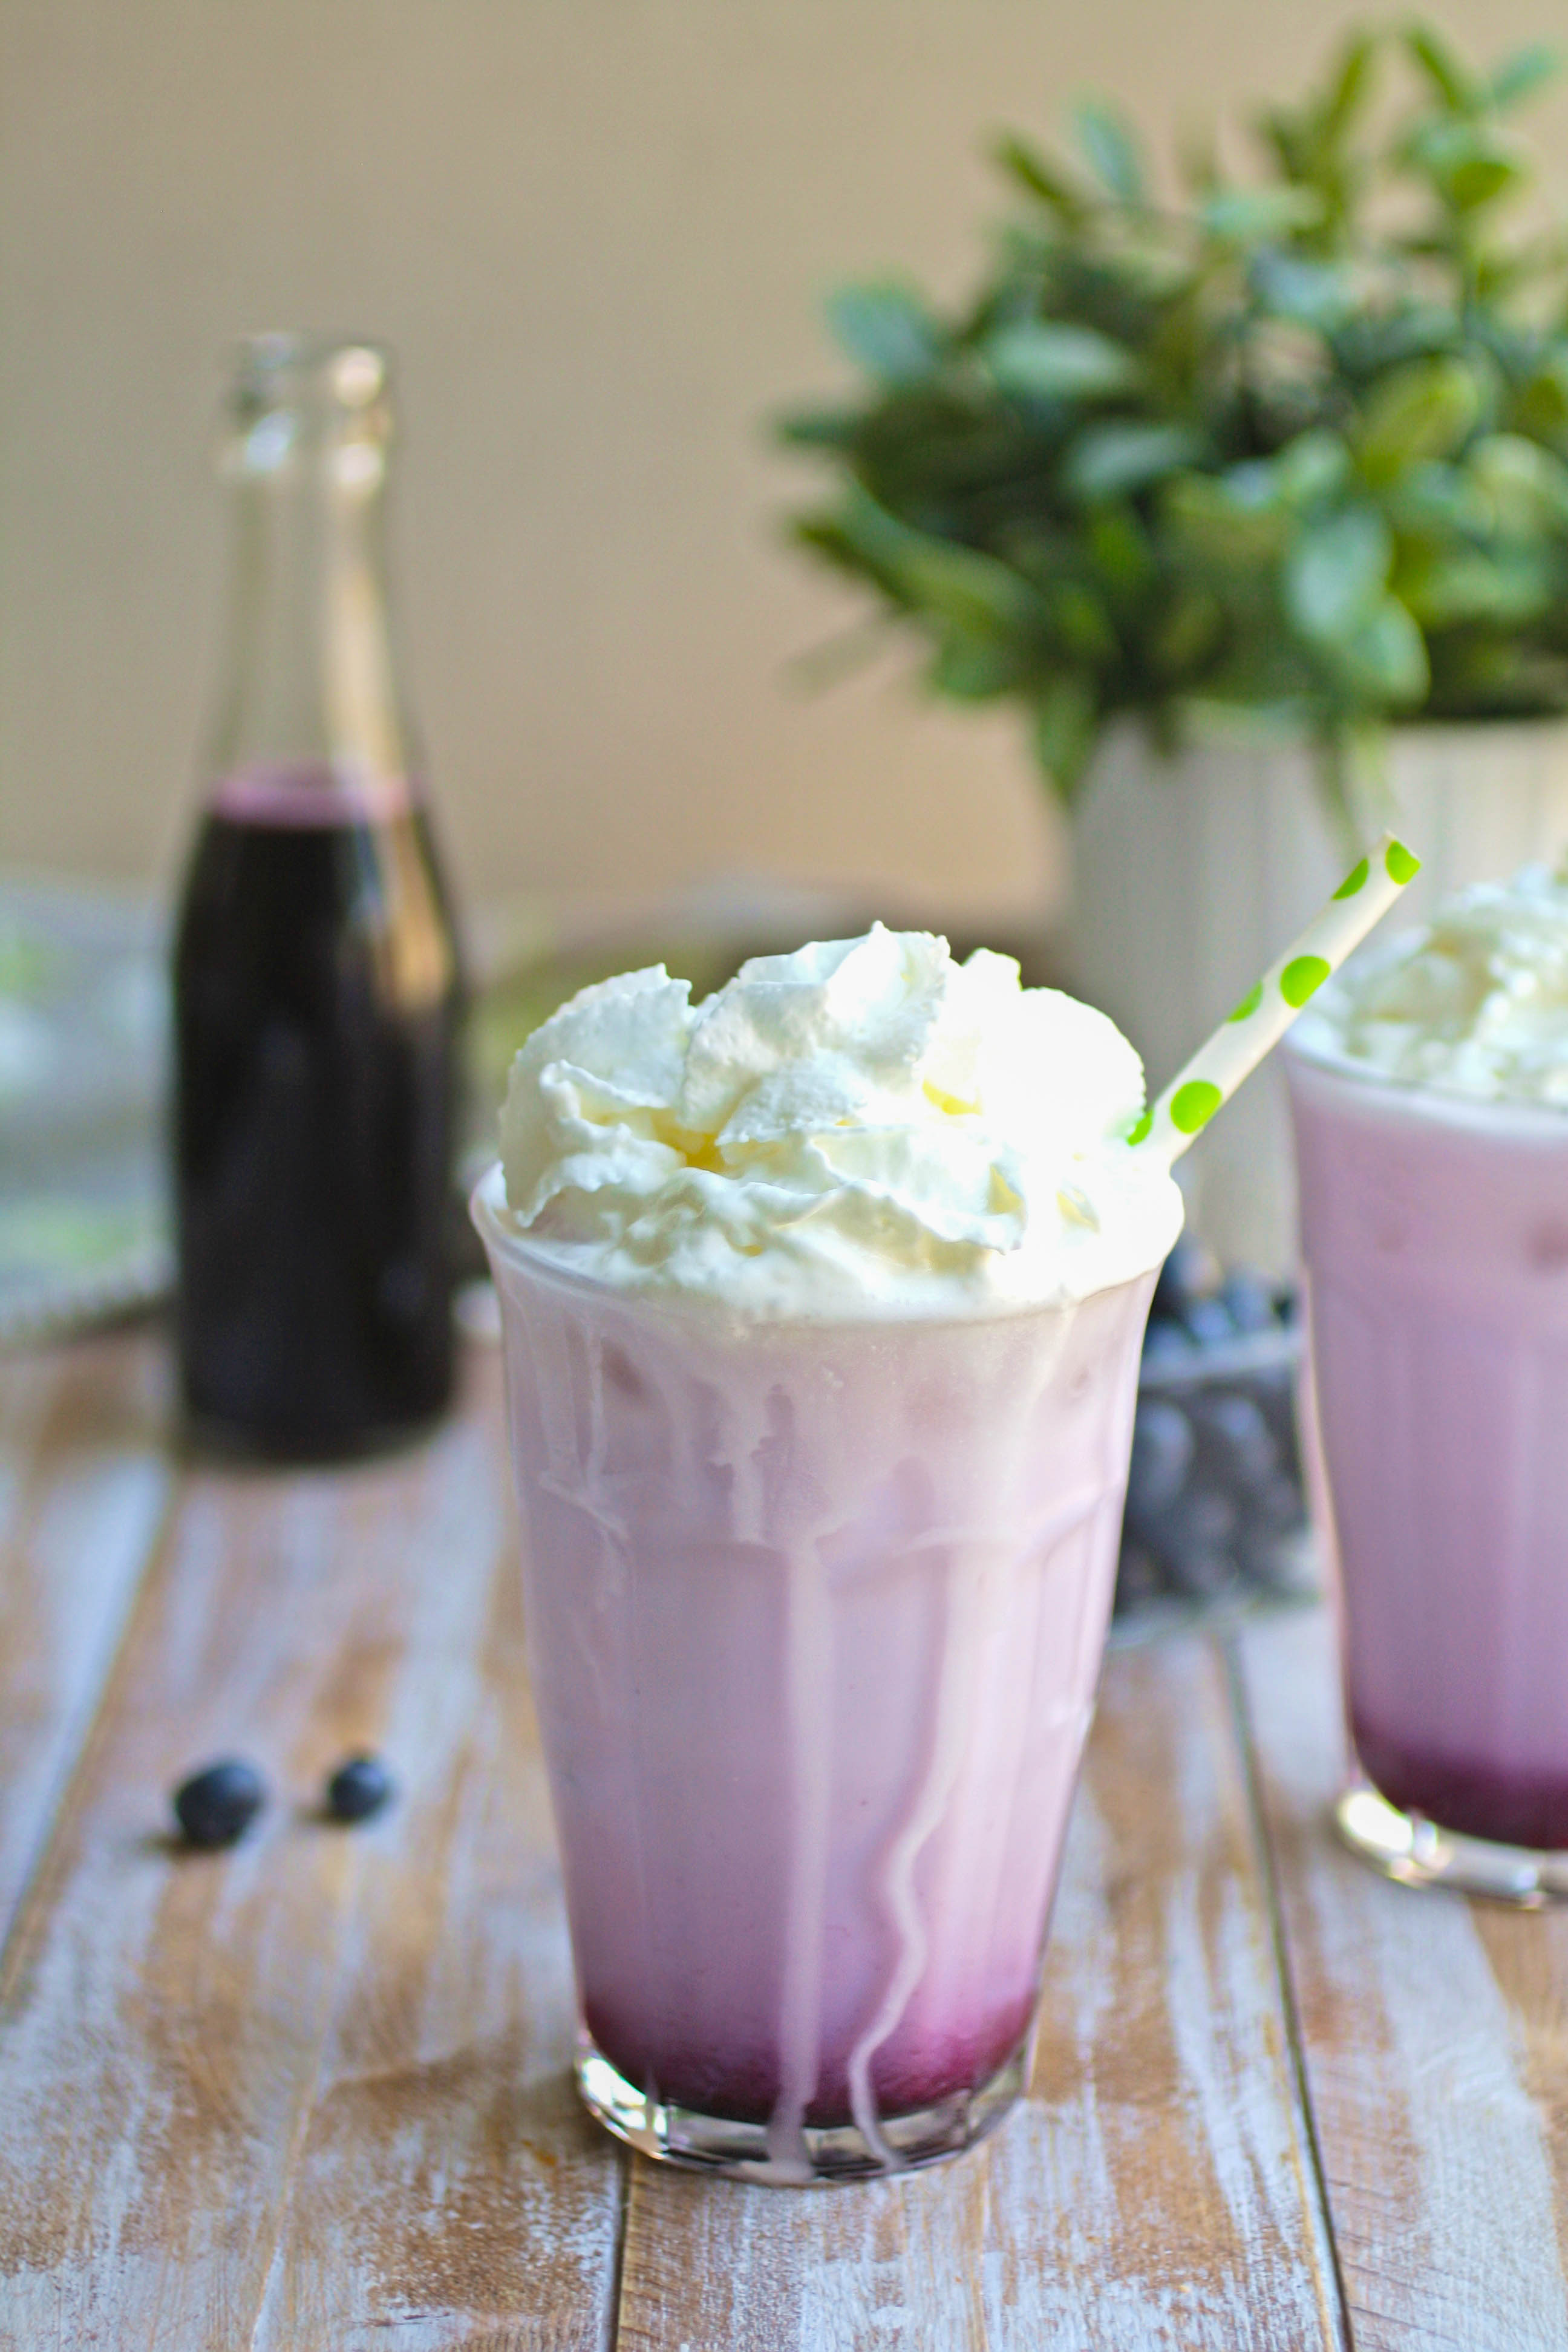 Blueberry Italian Cream Soda drinks are such a fun treat! Blueberry Italian Cream Soda drinks are the perfect indulgence as the weather heats up.